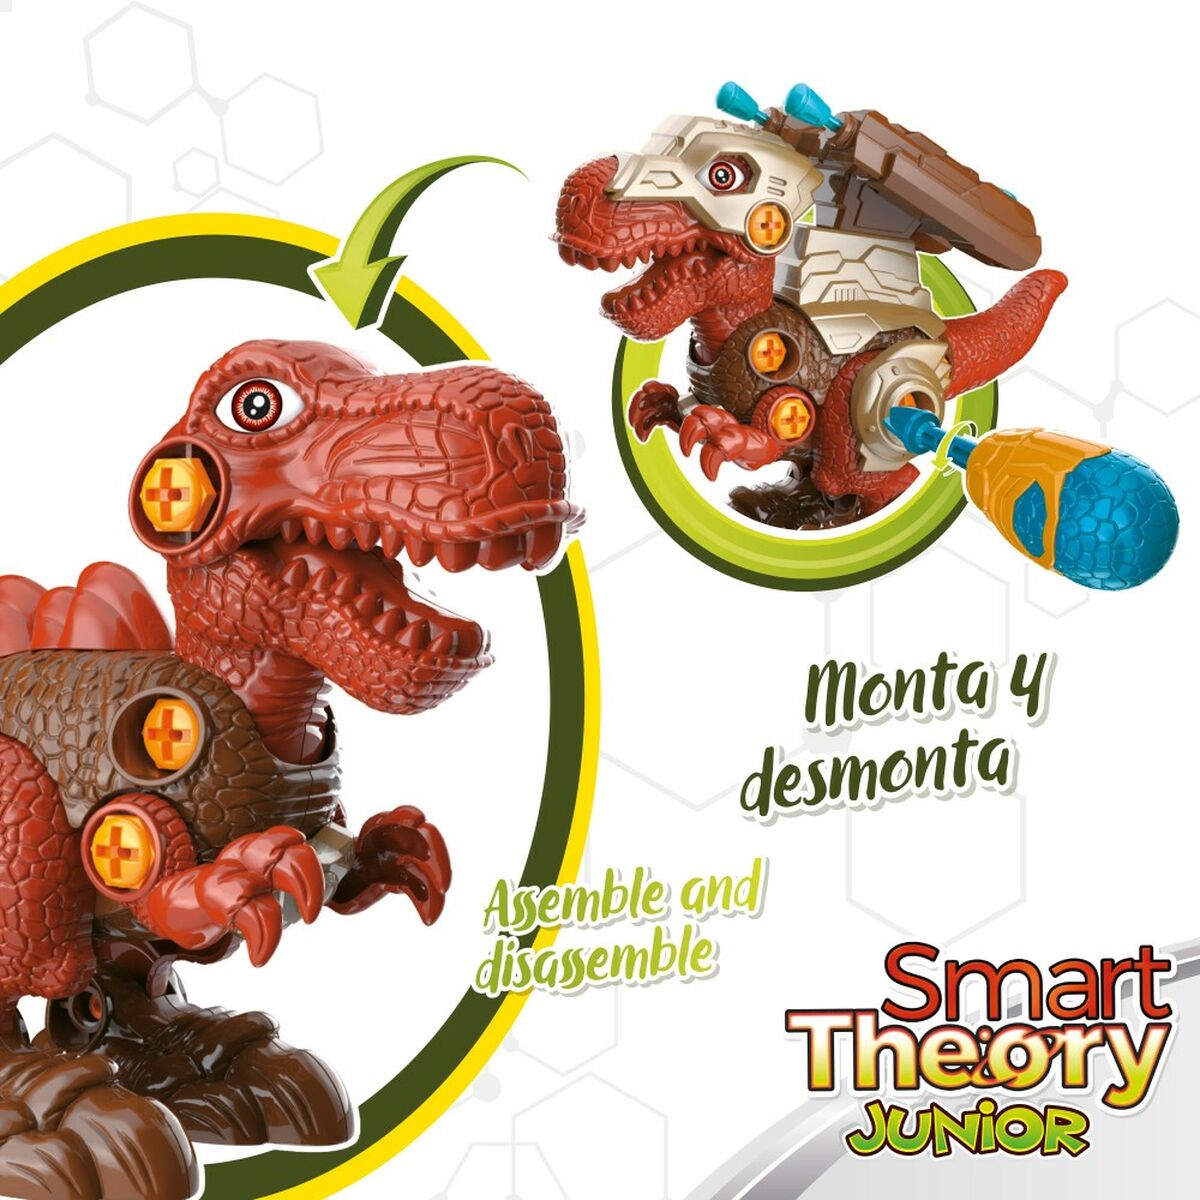 Set of 2 Dinosaurs Colorbaby 21 x 14 x 9,5 cm articulated Throws Projectiles 4 Units Dinosaur